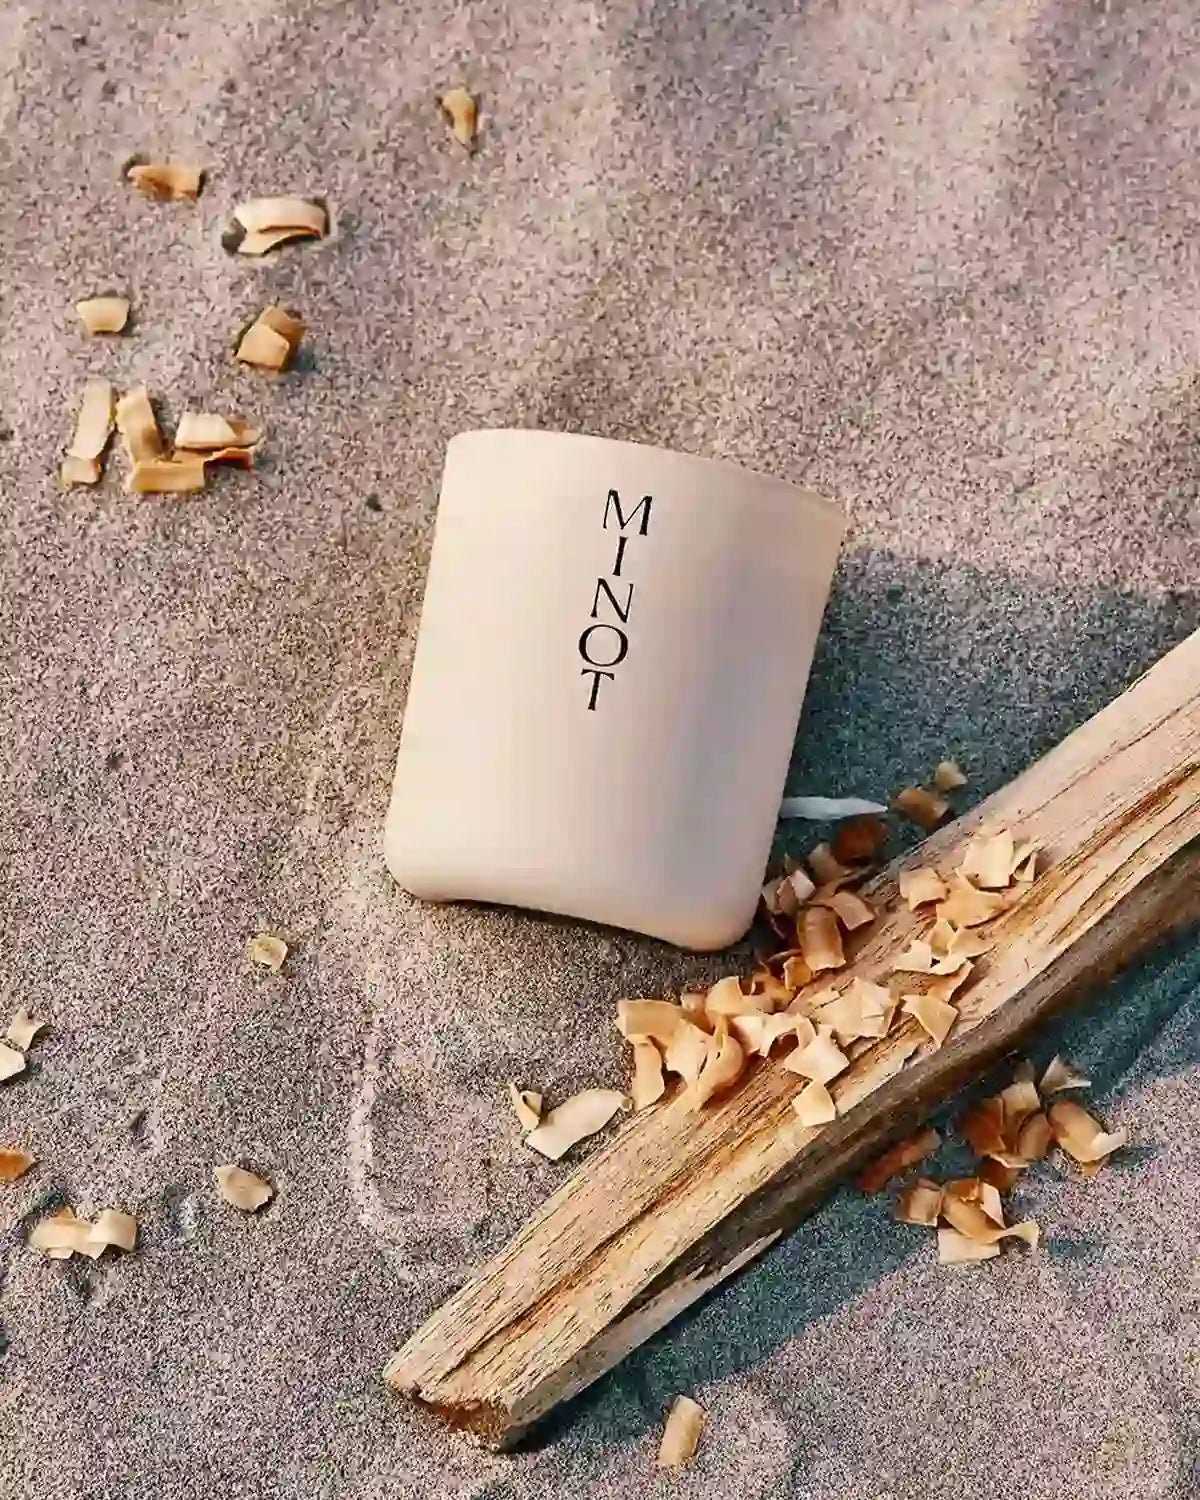 The natural Voyage candle lays in beach sand and coconut shavings next to a piece of driftwood